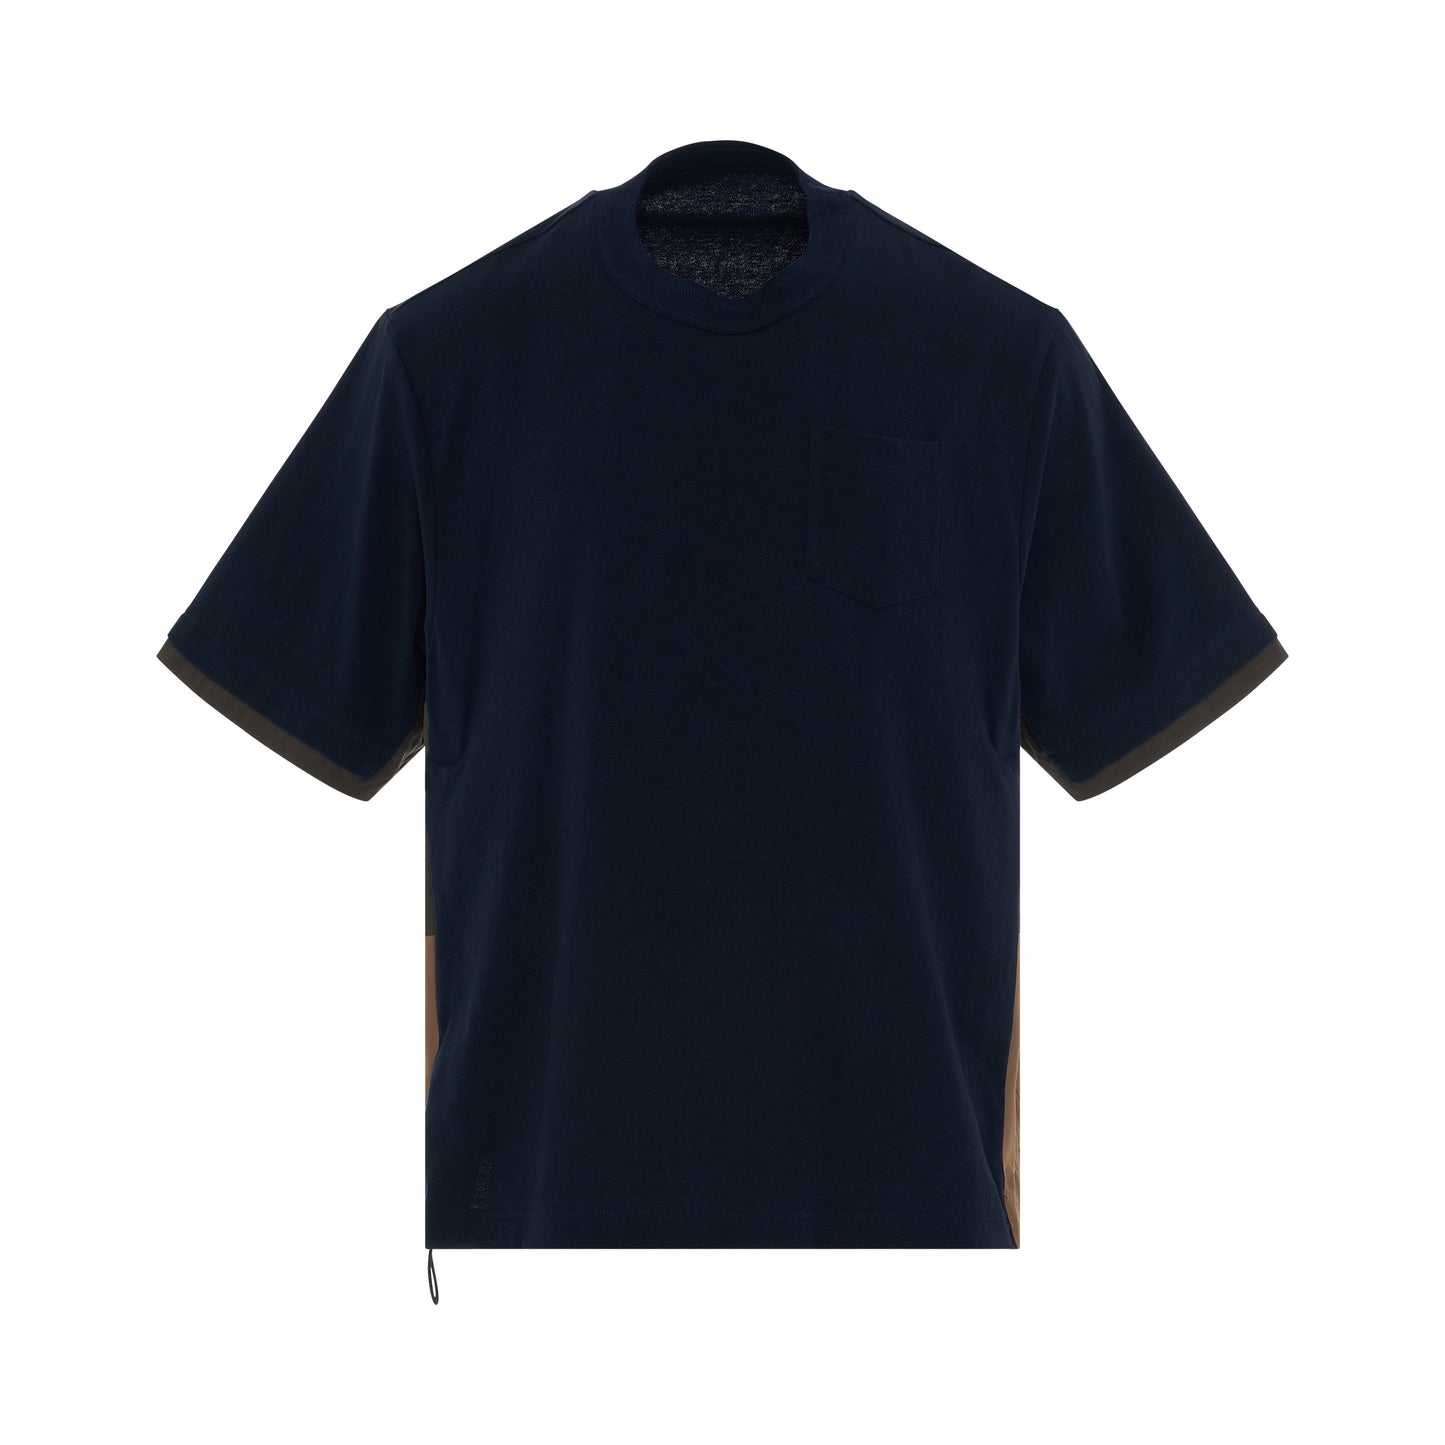 Sports Mix T-Shirt in Navy